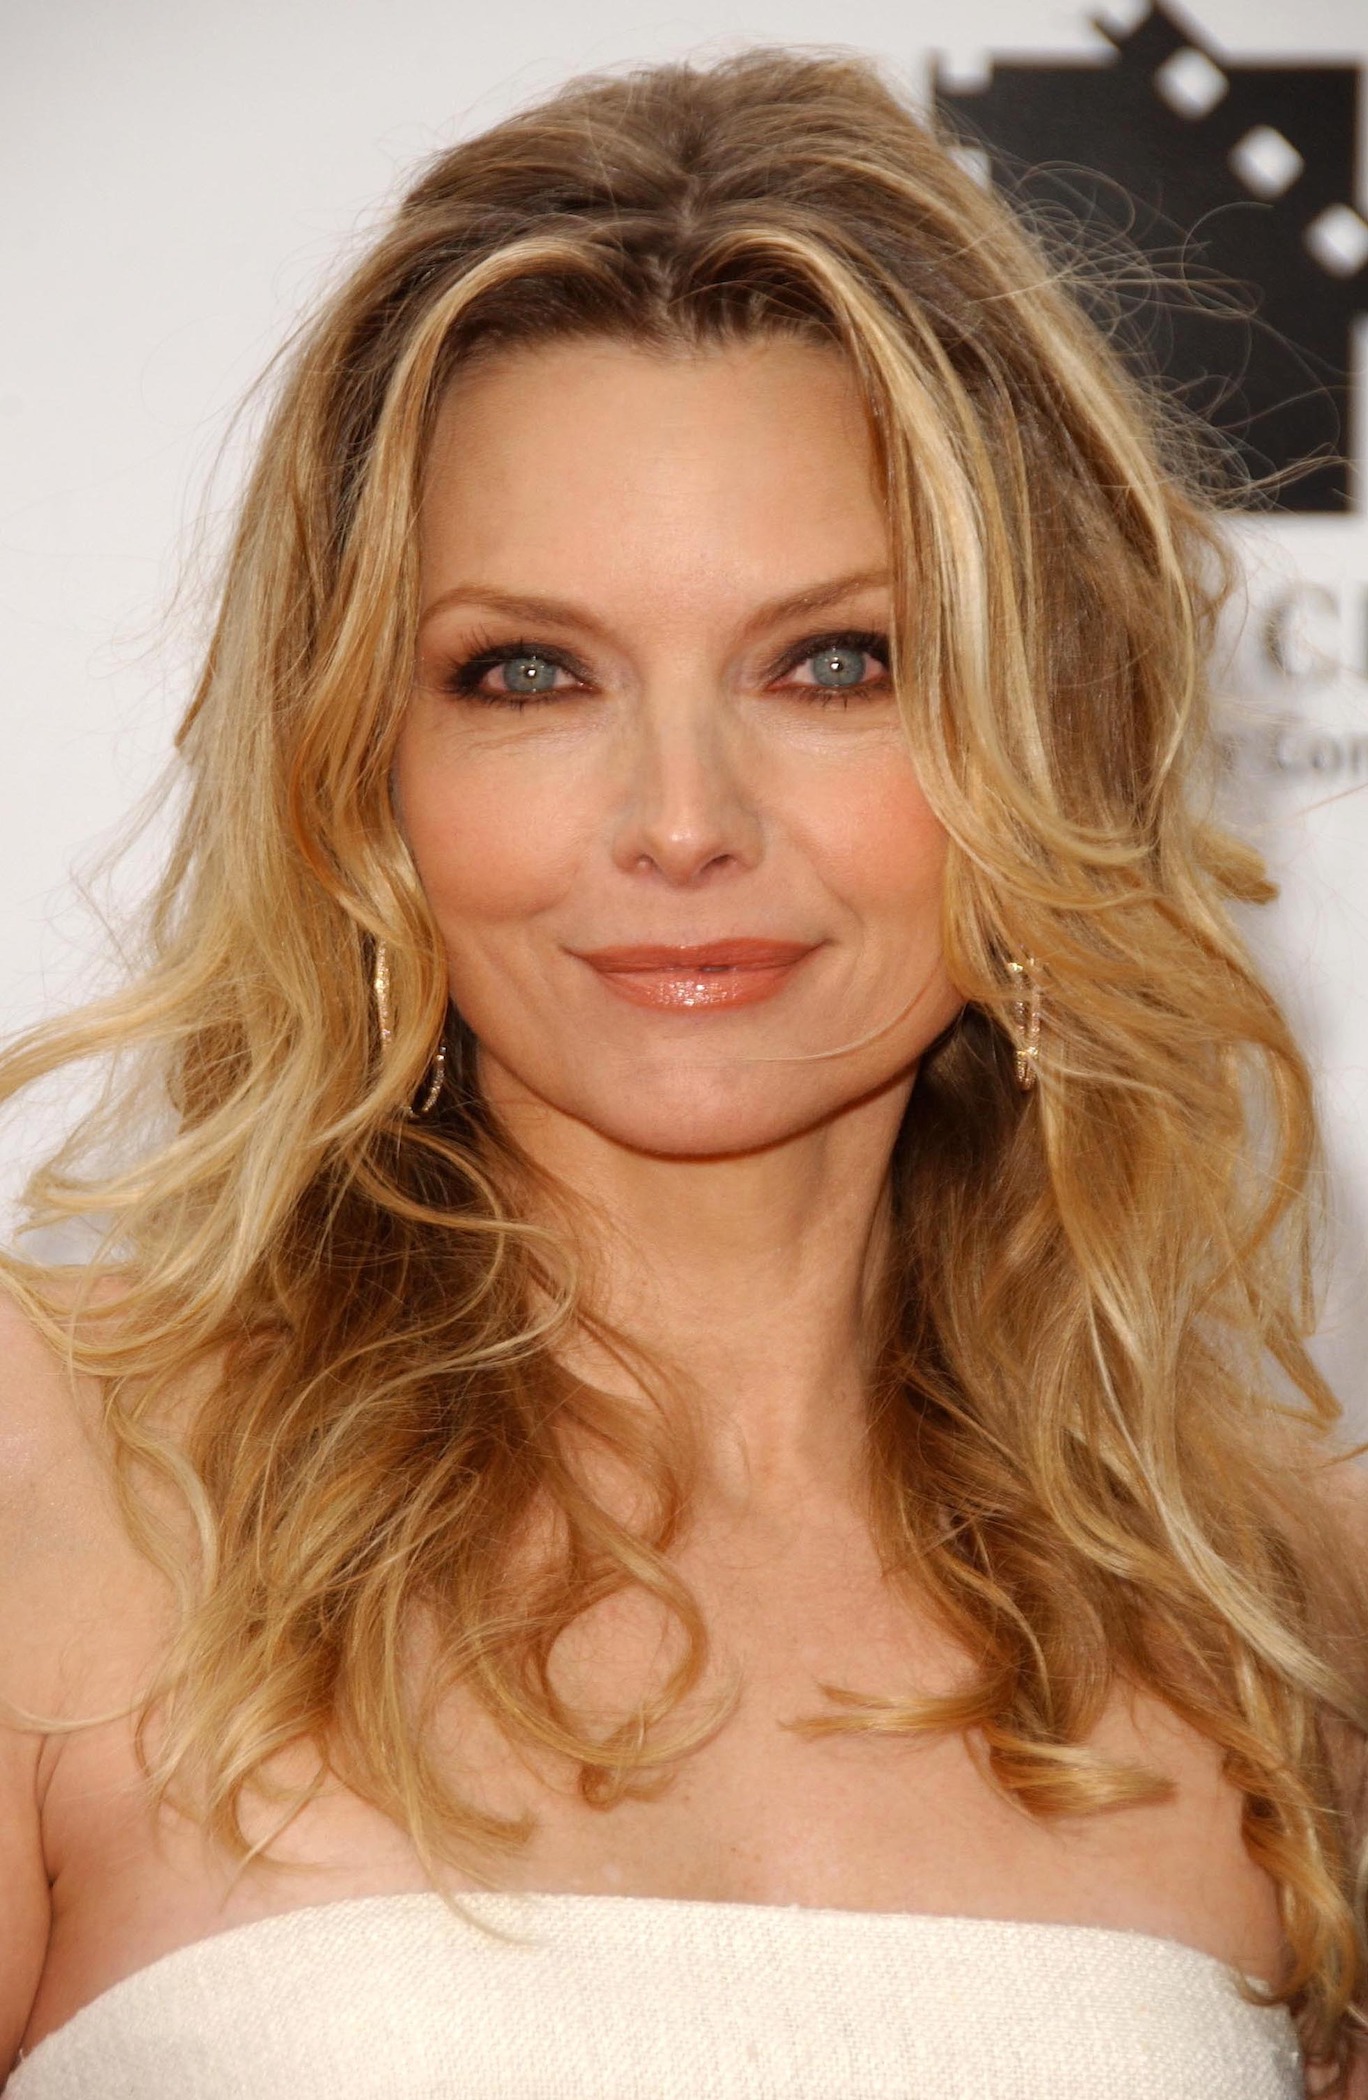 Who Is Michelle Pfeiffer 5 Things You Should Know About The Iconic Actress